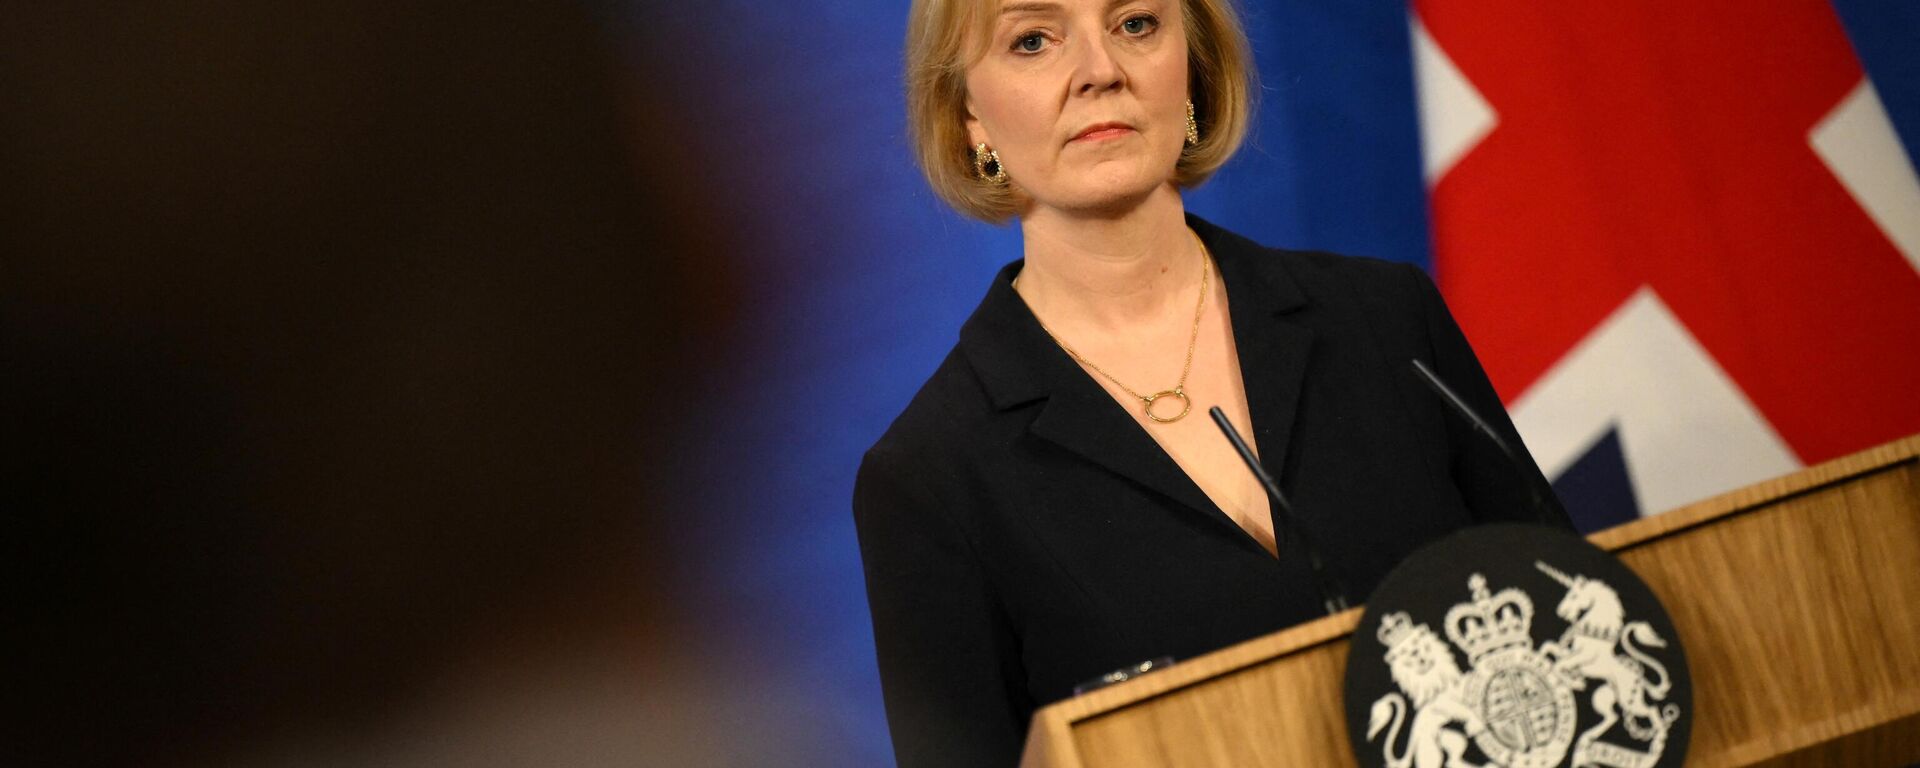 Britain's Prime Minister Liz Truss holds a press conference in the Downing Street Briefing Room in central London on October 14, 2022. - Sputnik International, 1920, 04.11.2022